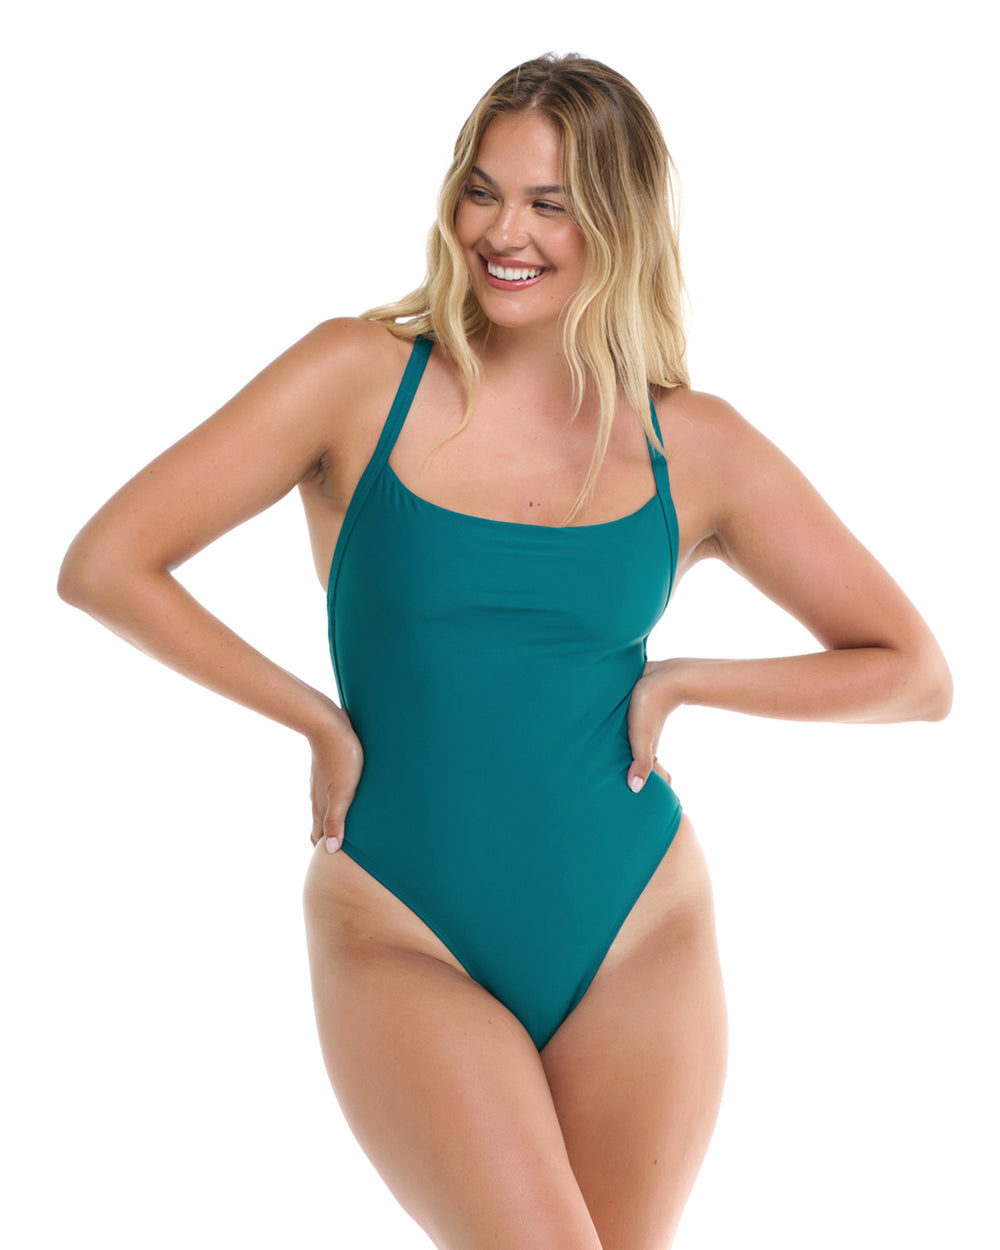 Body Glove Smoothies Electra One Piece Swimsuit - Kingfisher